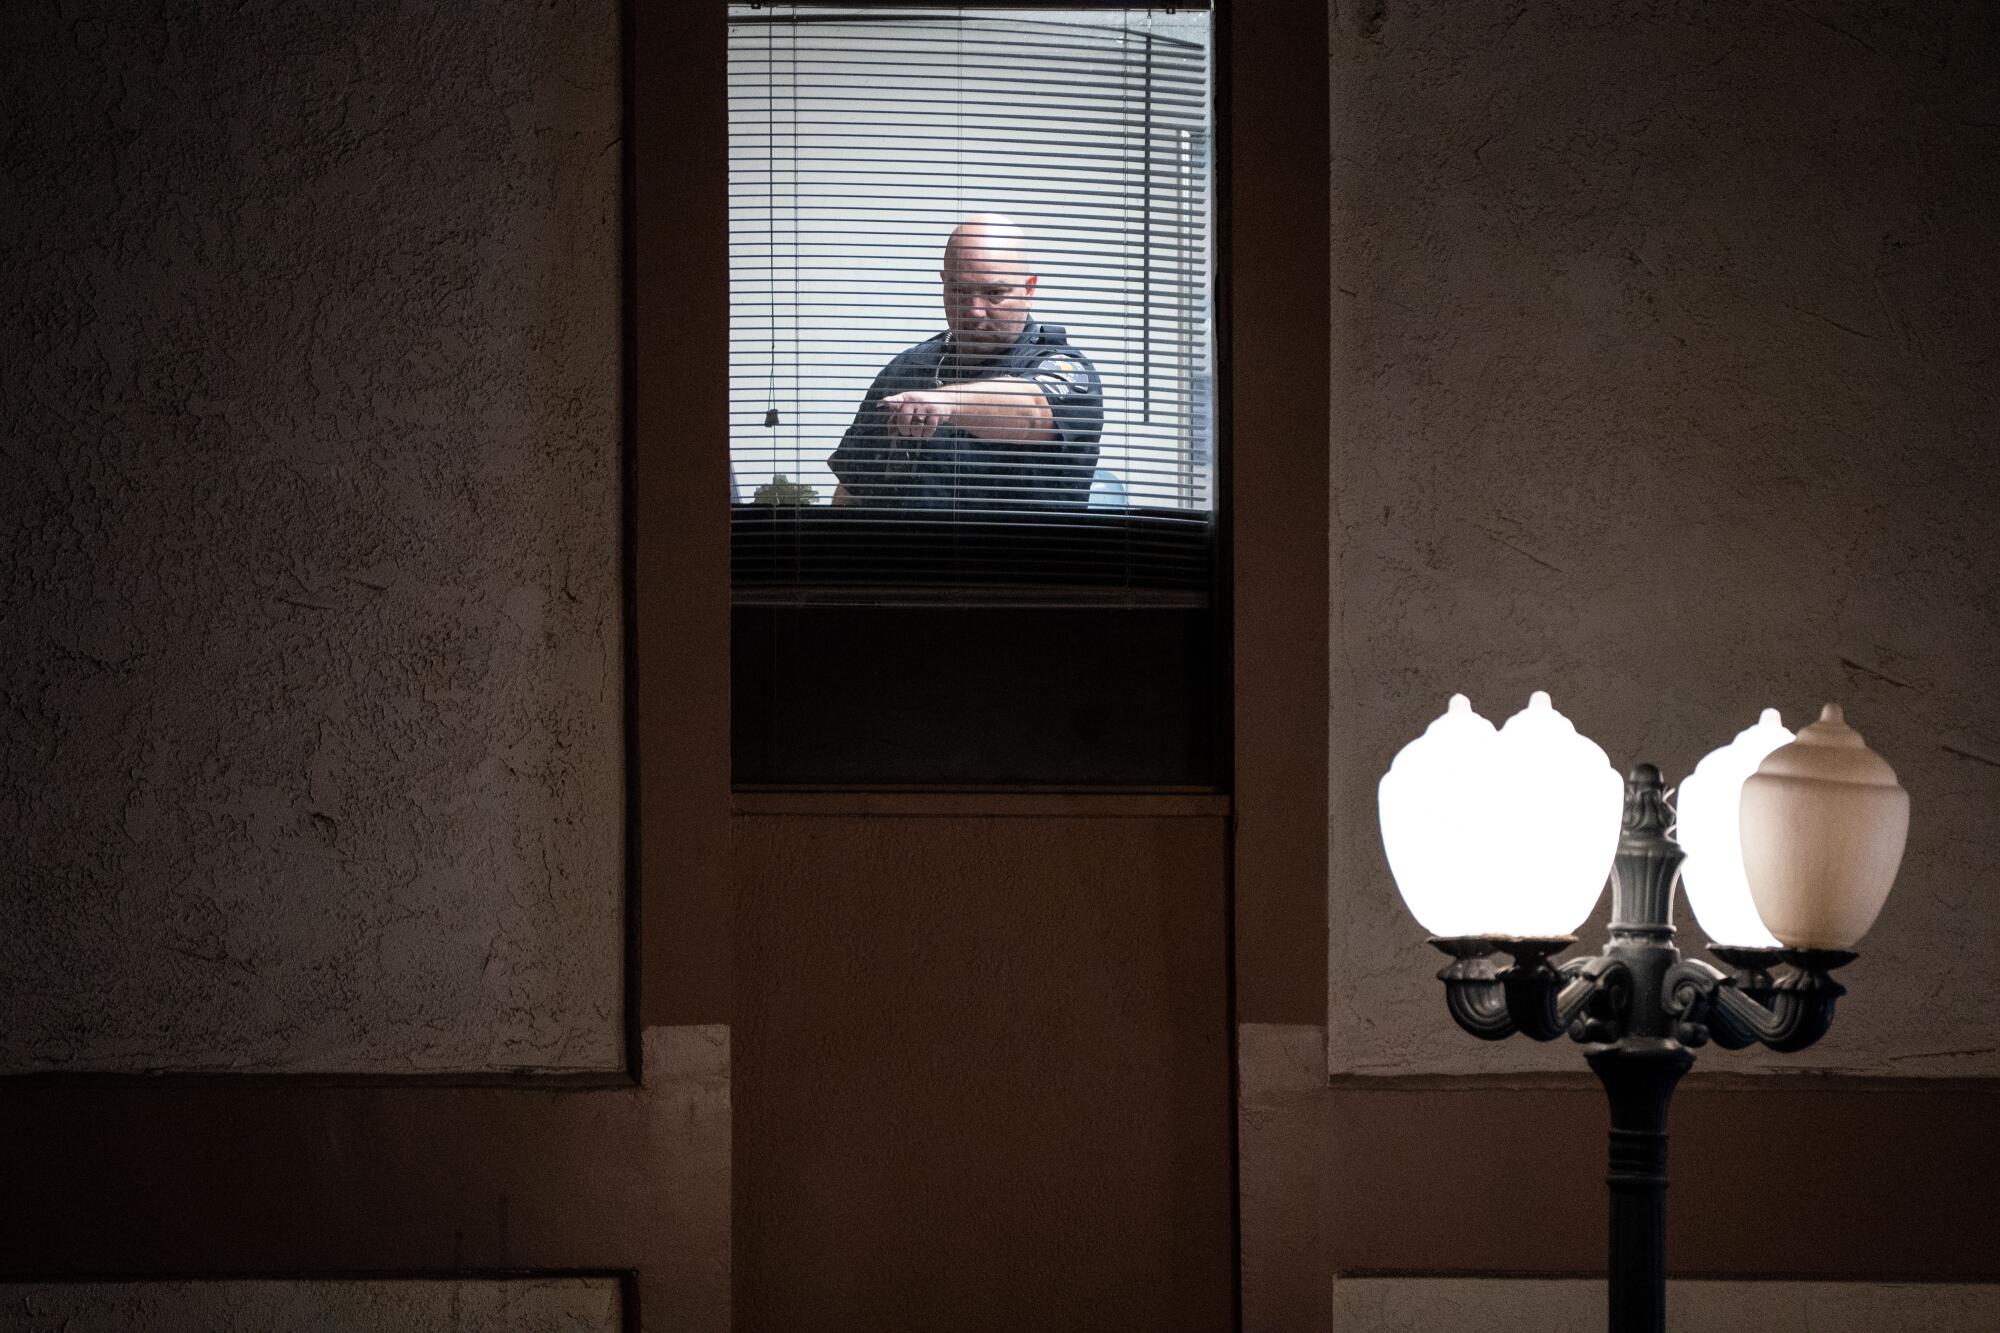 A police officer is seen through a window pointing at something.